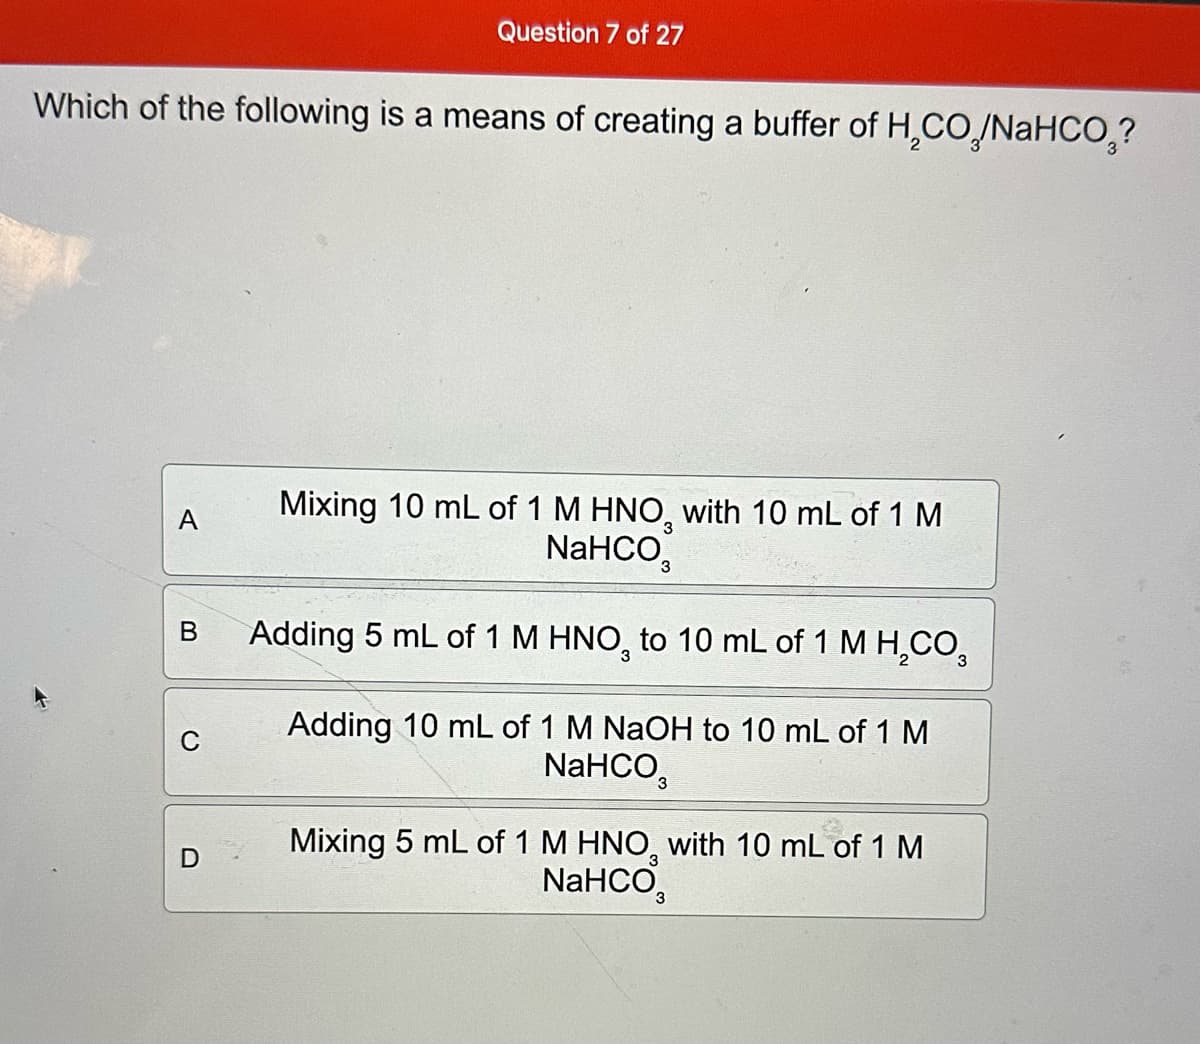 Question 7 of 27
Which of the following is a means of creating a buffer of H₂CO/NaHCO₂?
A
Mixing 10 mL of 1 M HNO3 with 10 mL of 1 M
NaHCO
B
Adding 5 mL of 1 M HNO3 to 10 mL of 1 M HCO3
C
D
Adding 10 mL of 1 M NaOH to 10 mL of 1 M
NaHCO
Mixing 5 mL of 1 M HNO3 with 10 mL of 1 M
NaHCO